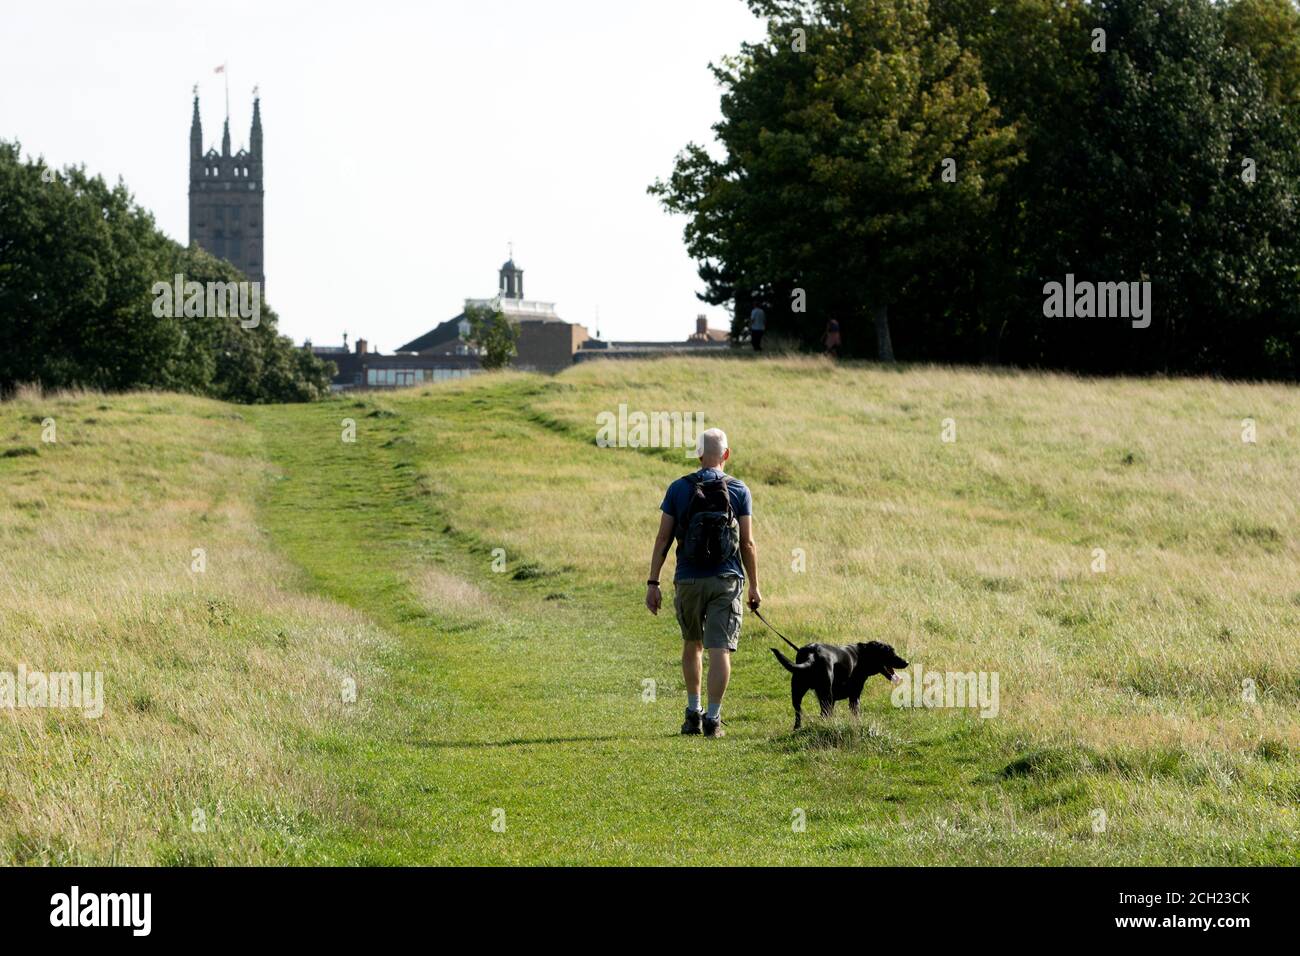 A person walking a dog on the Lammas Field during the 2020 Covid-19 pandemic, Warwick, Warwickshire, England, UK Stock Photo